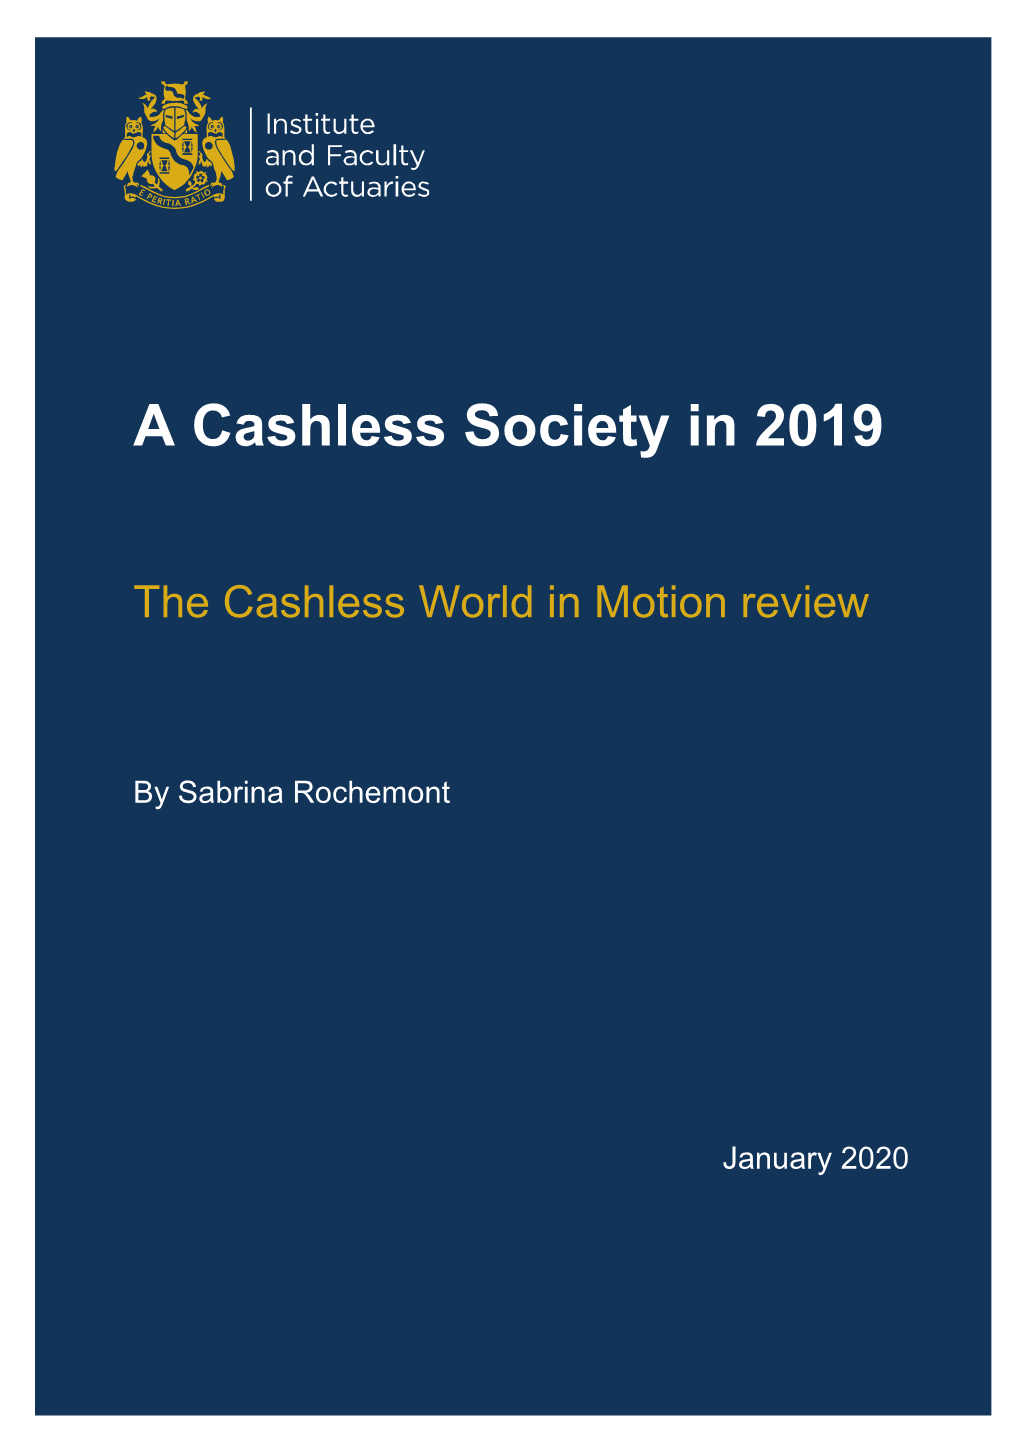 A Cashless Society in 2019